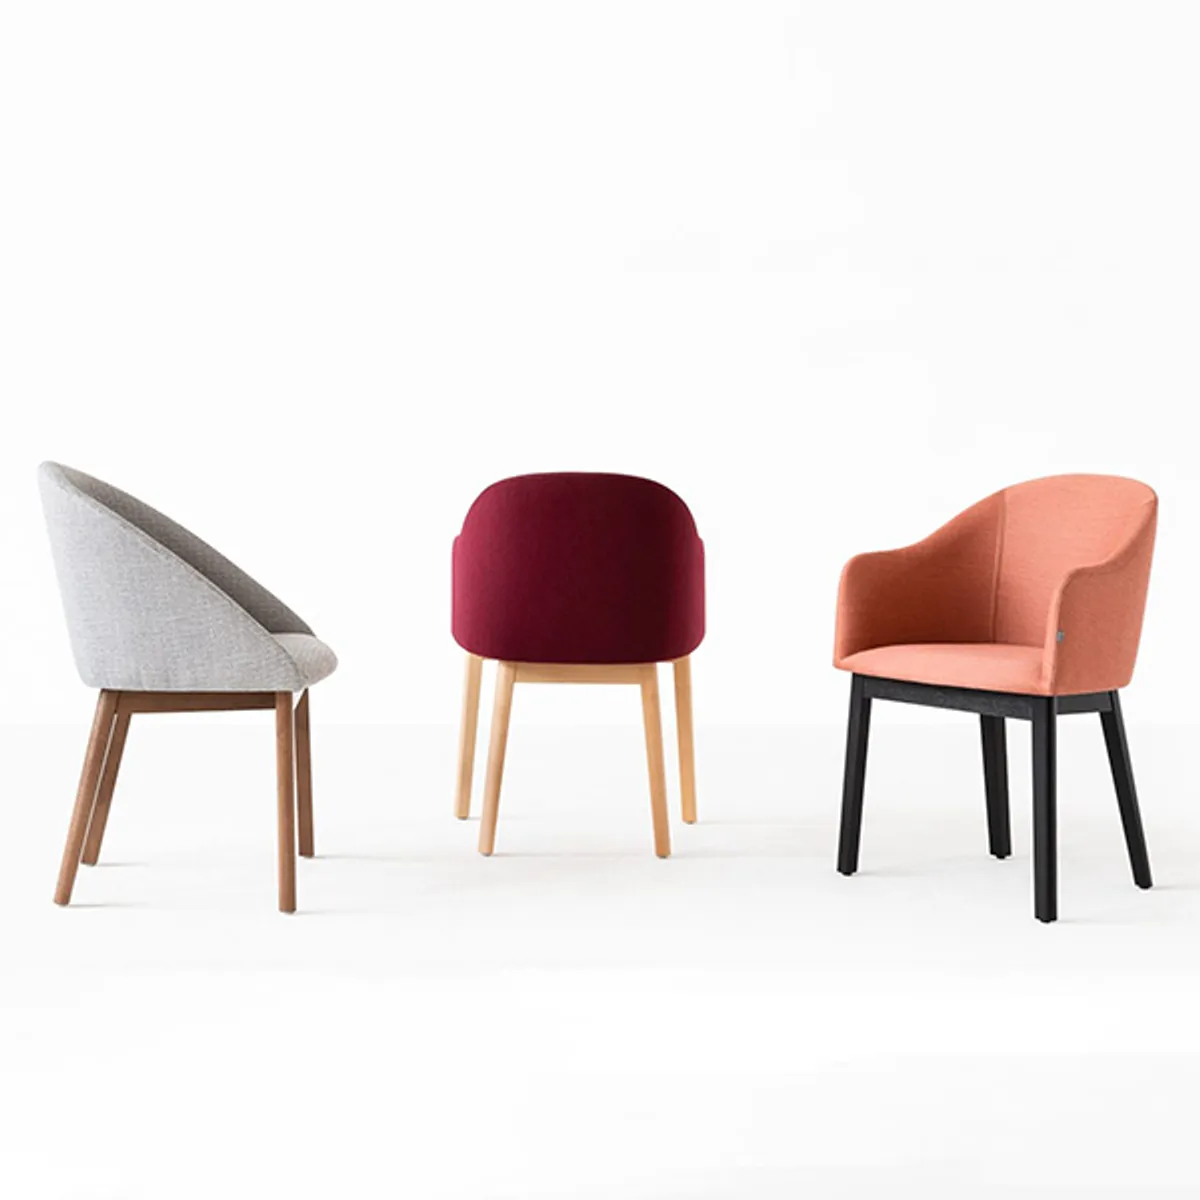 Luca Collection Upholstered Chairs For Commercial Use By Insideoutcontracts